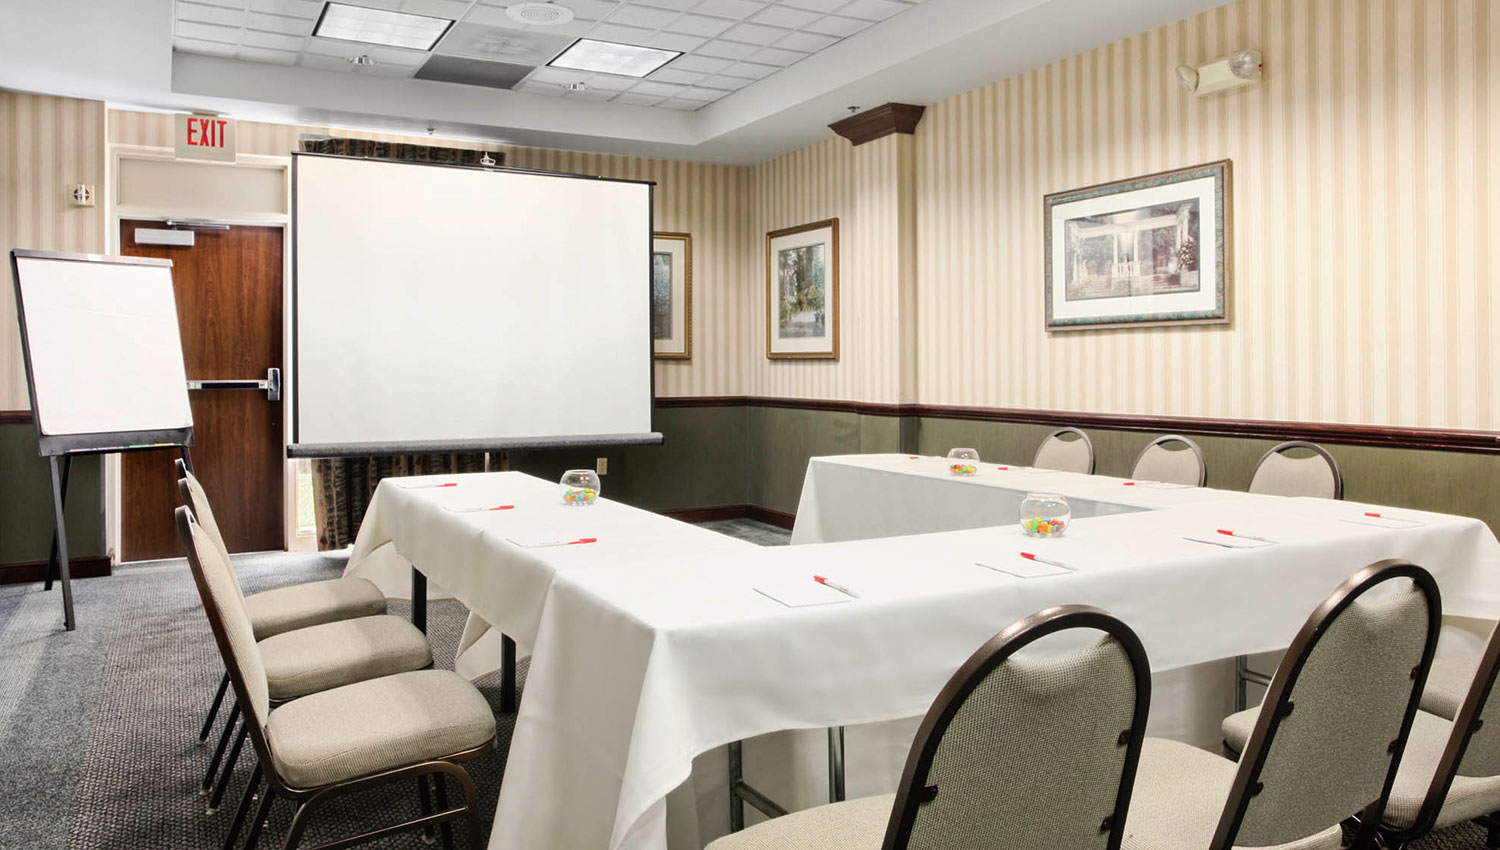 meeting rooms with white LCD projector and screen with a flip chart